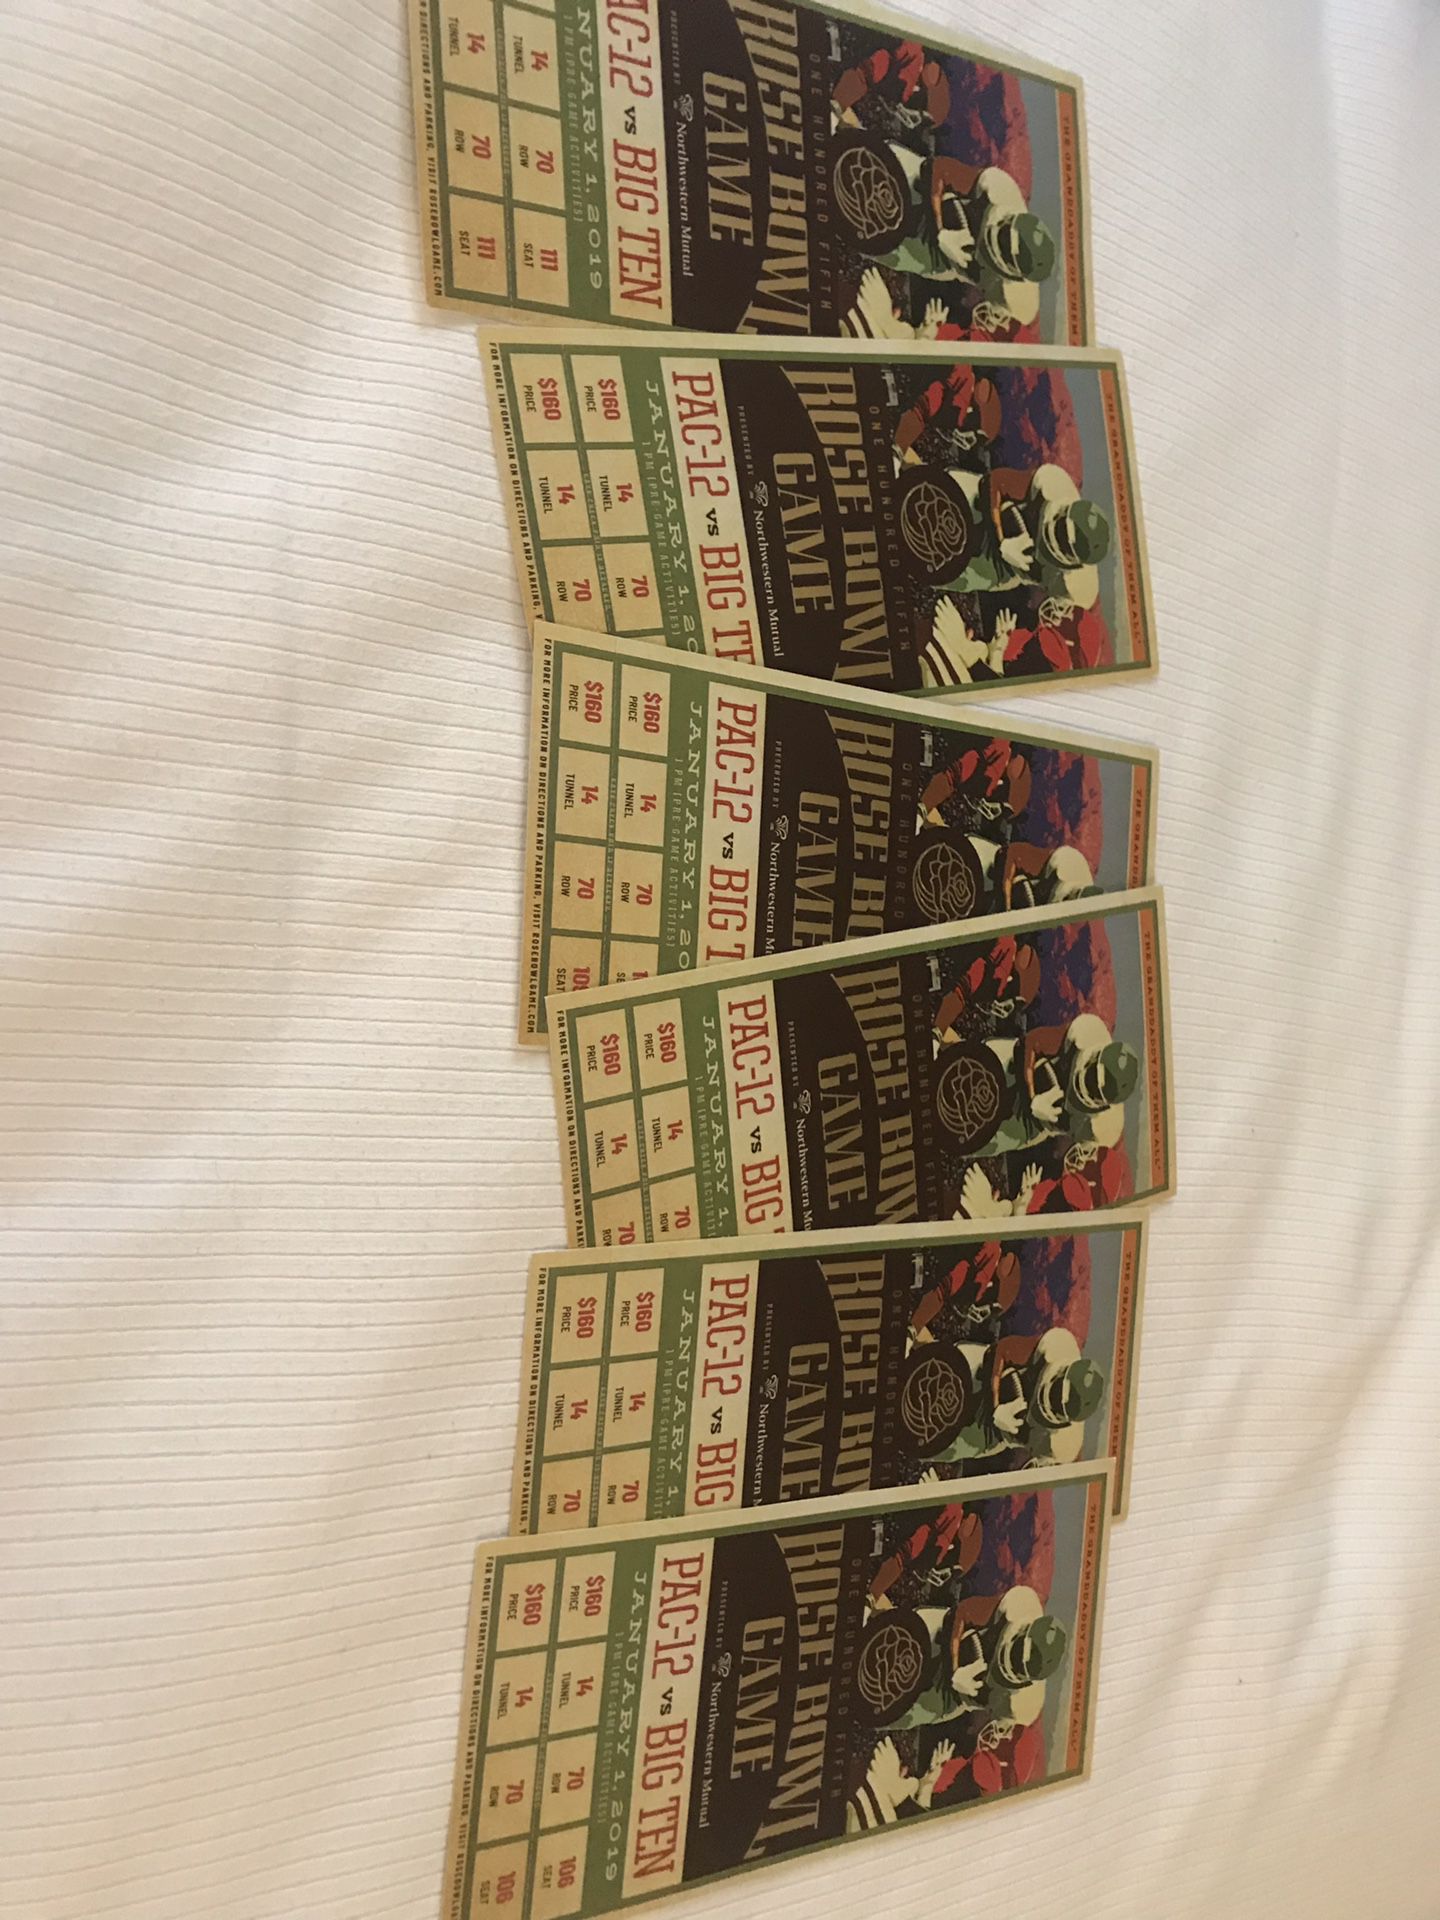 Rose Bowl tickets